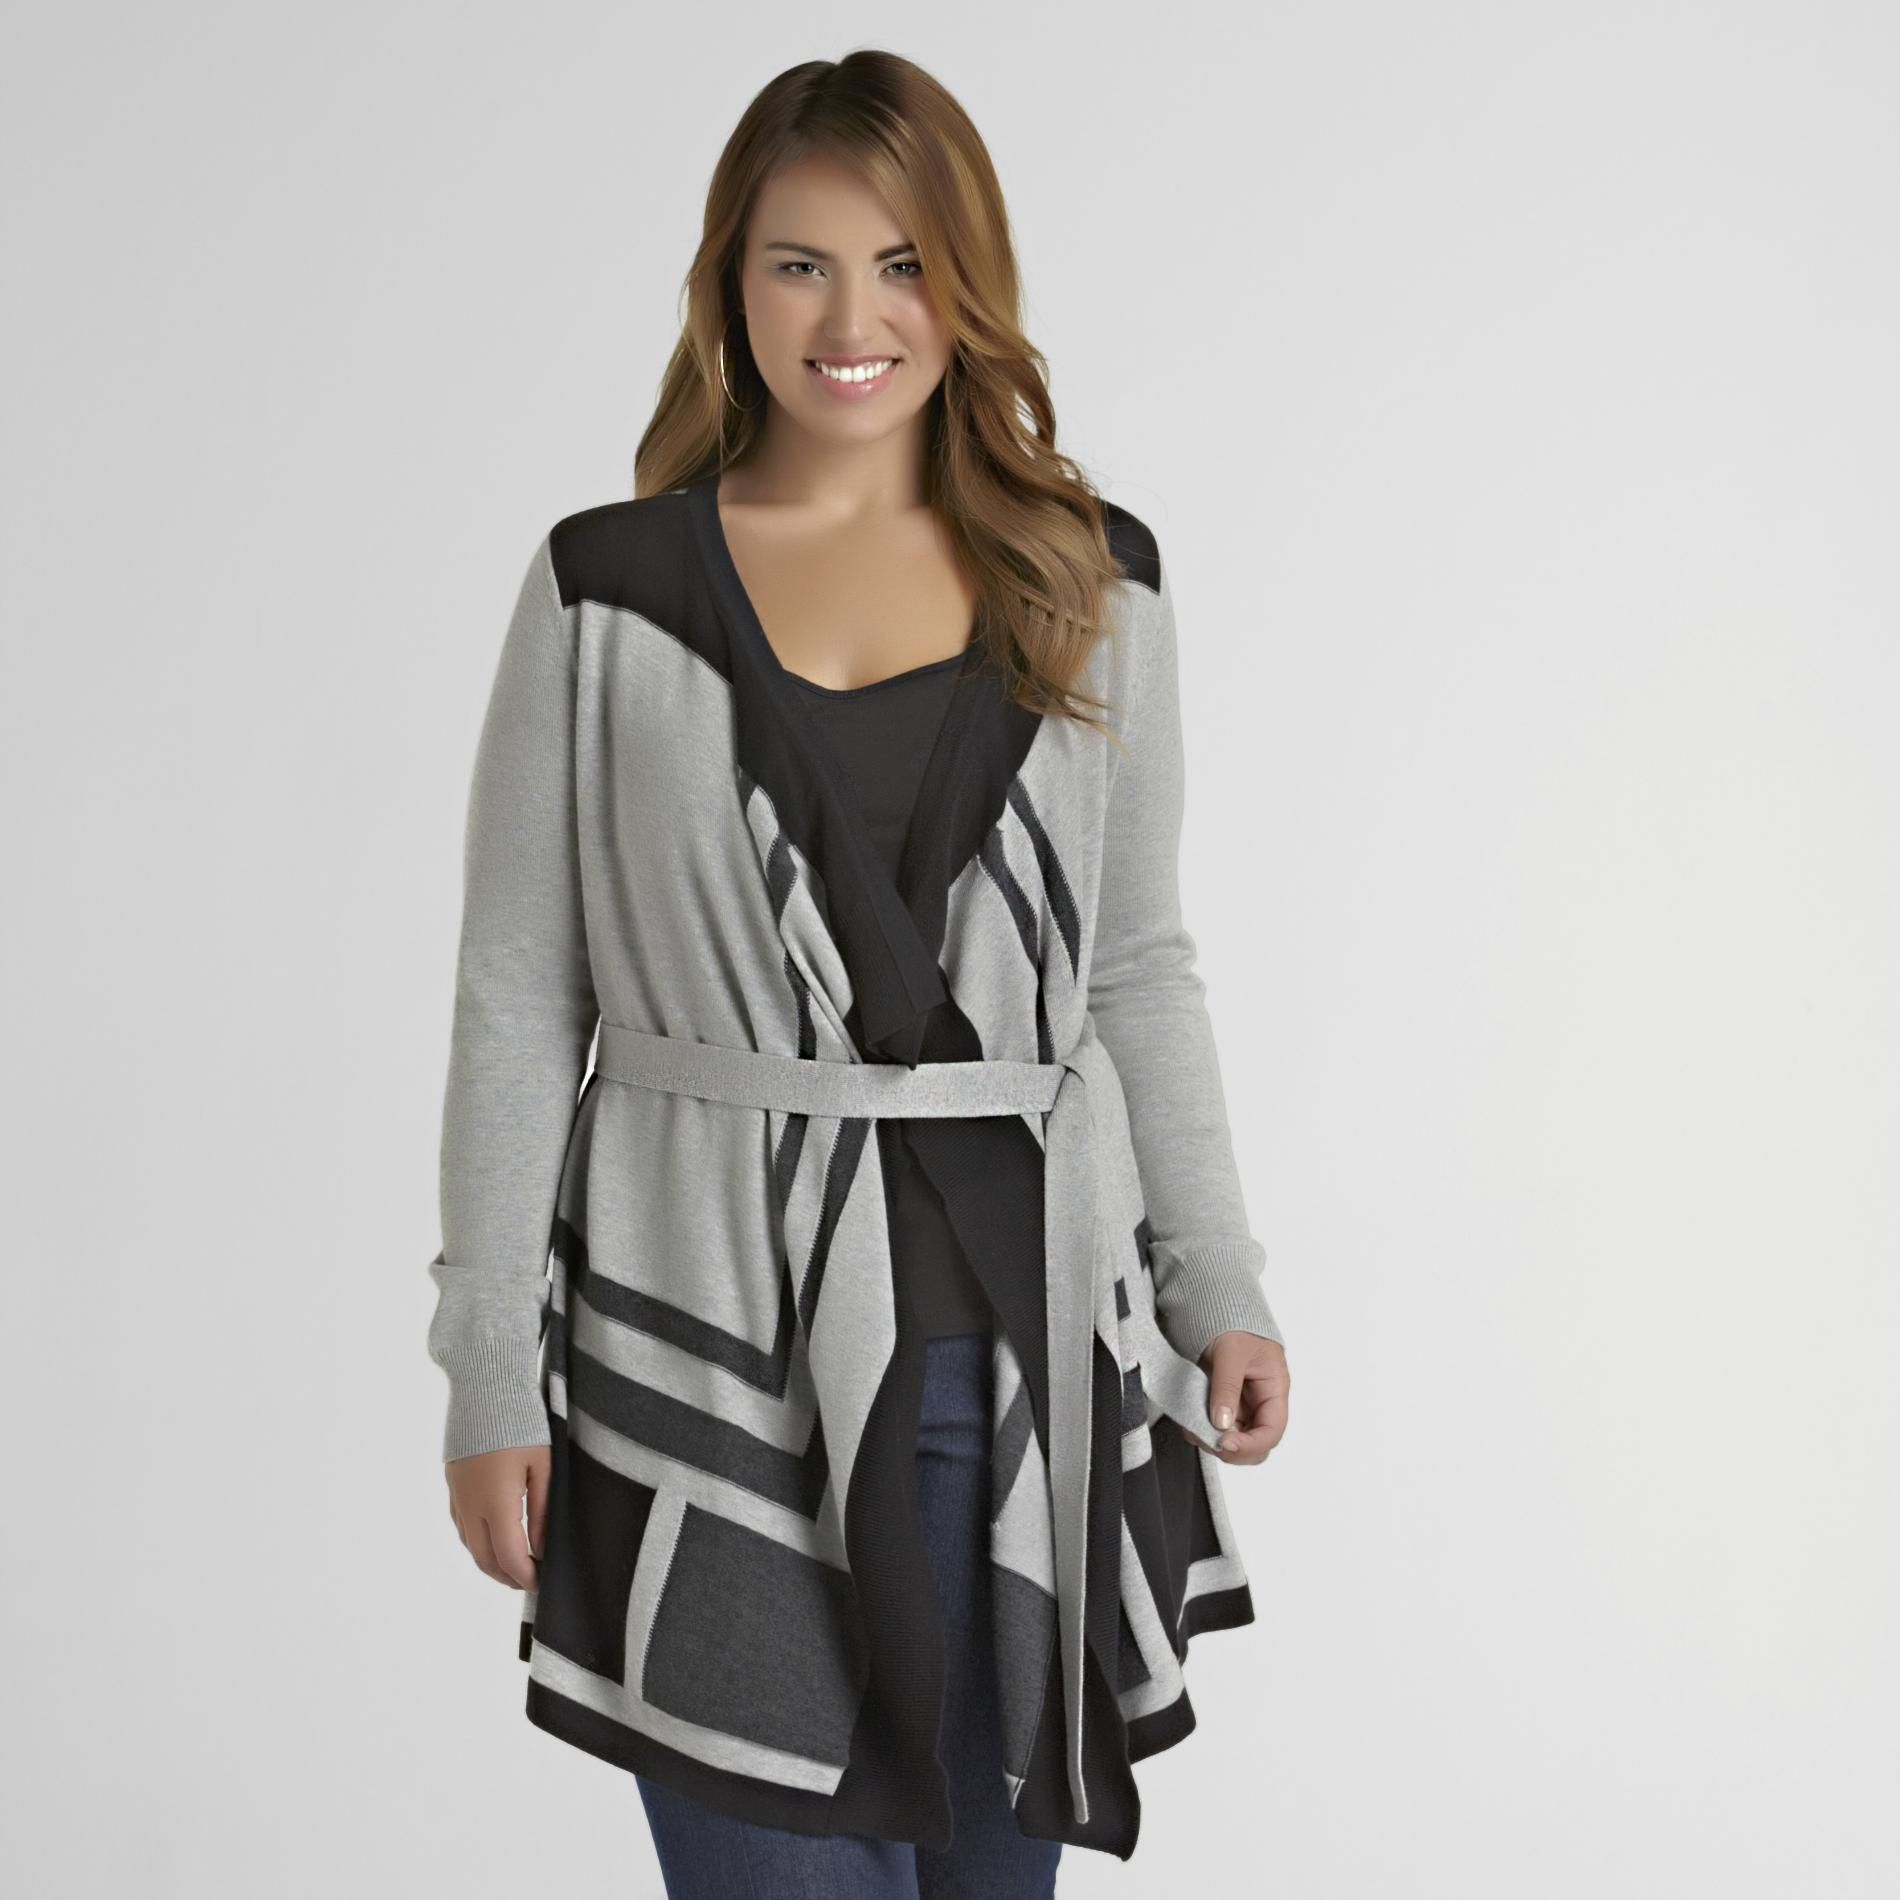 Love Your Style, Love Your Size Women's Plus Cascade Front Cardigan